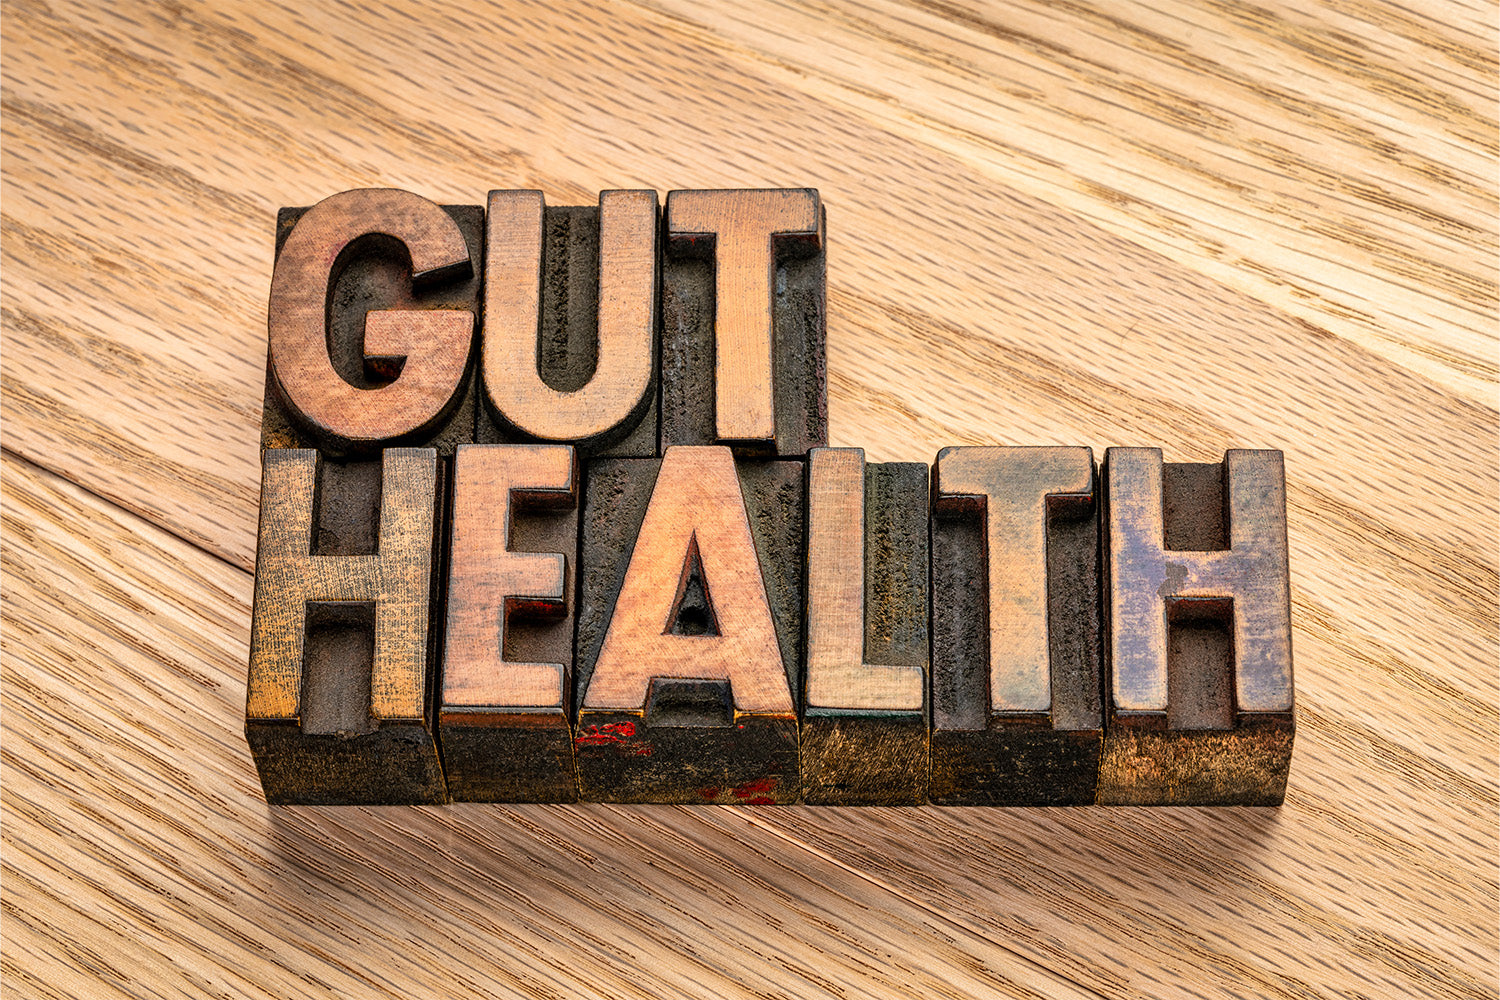 Why Is Gut Health Important?